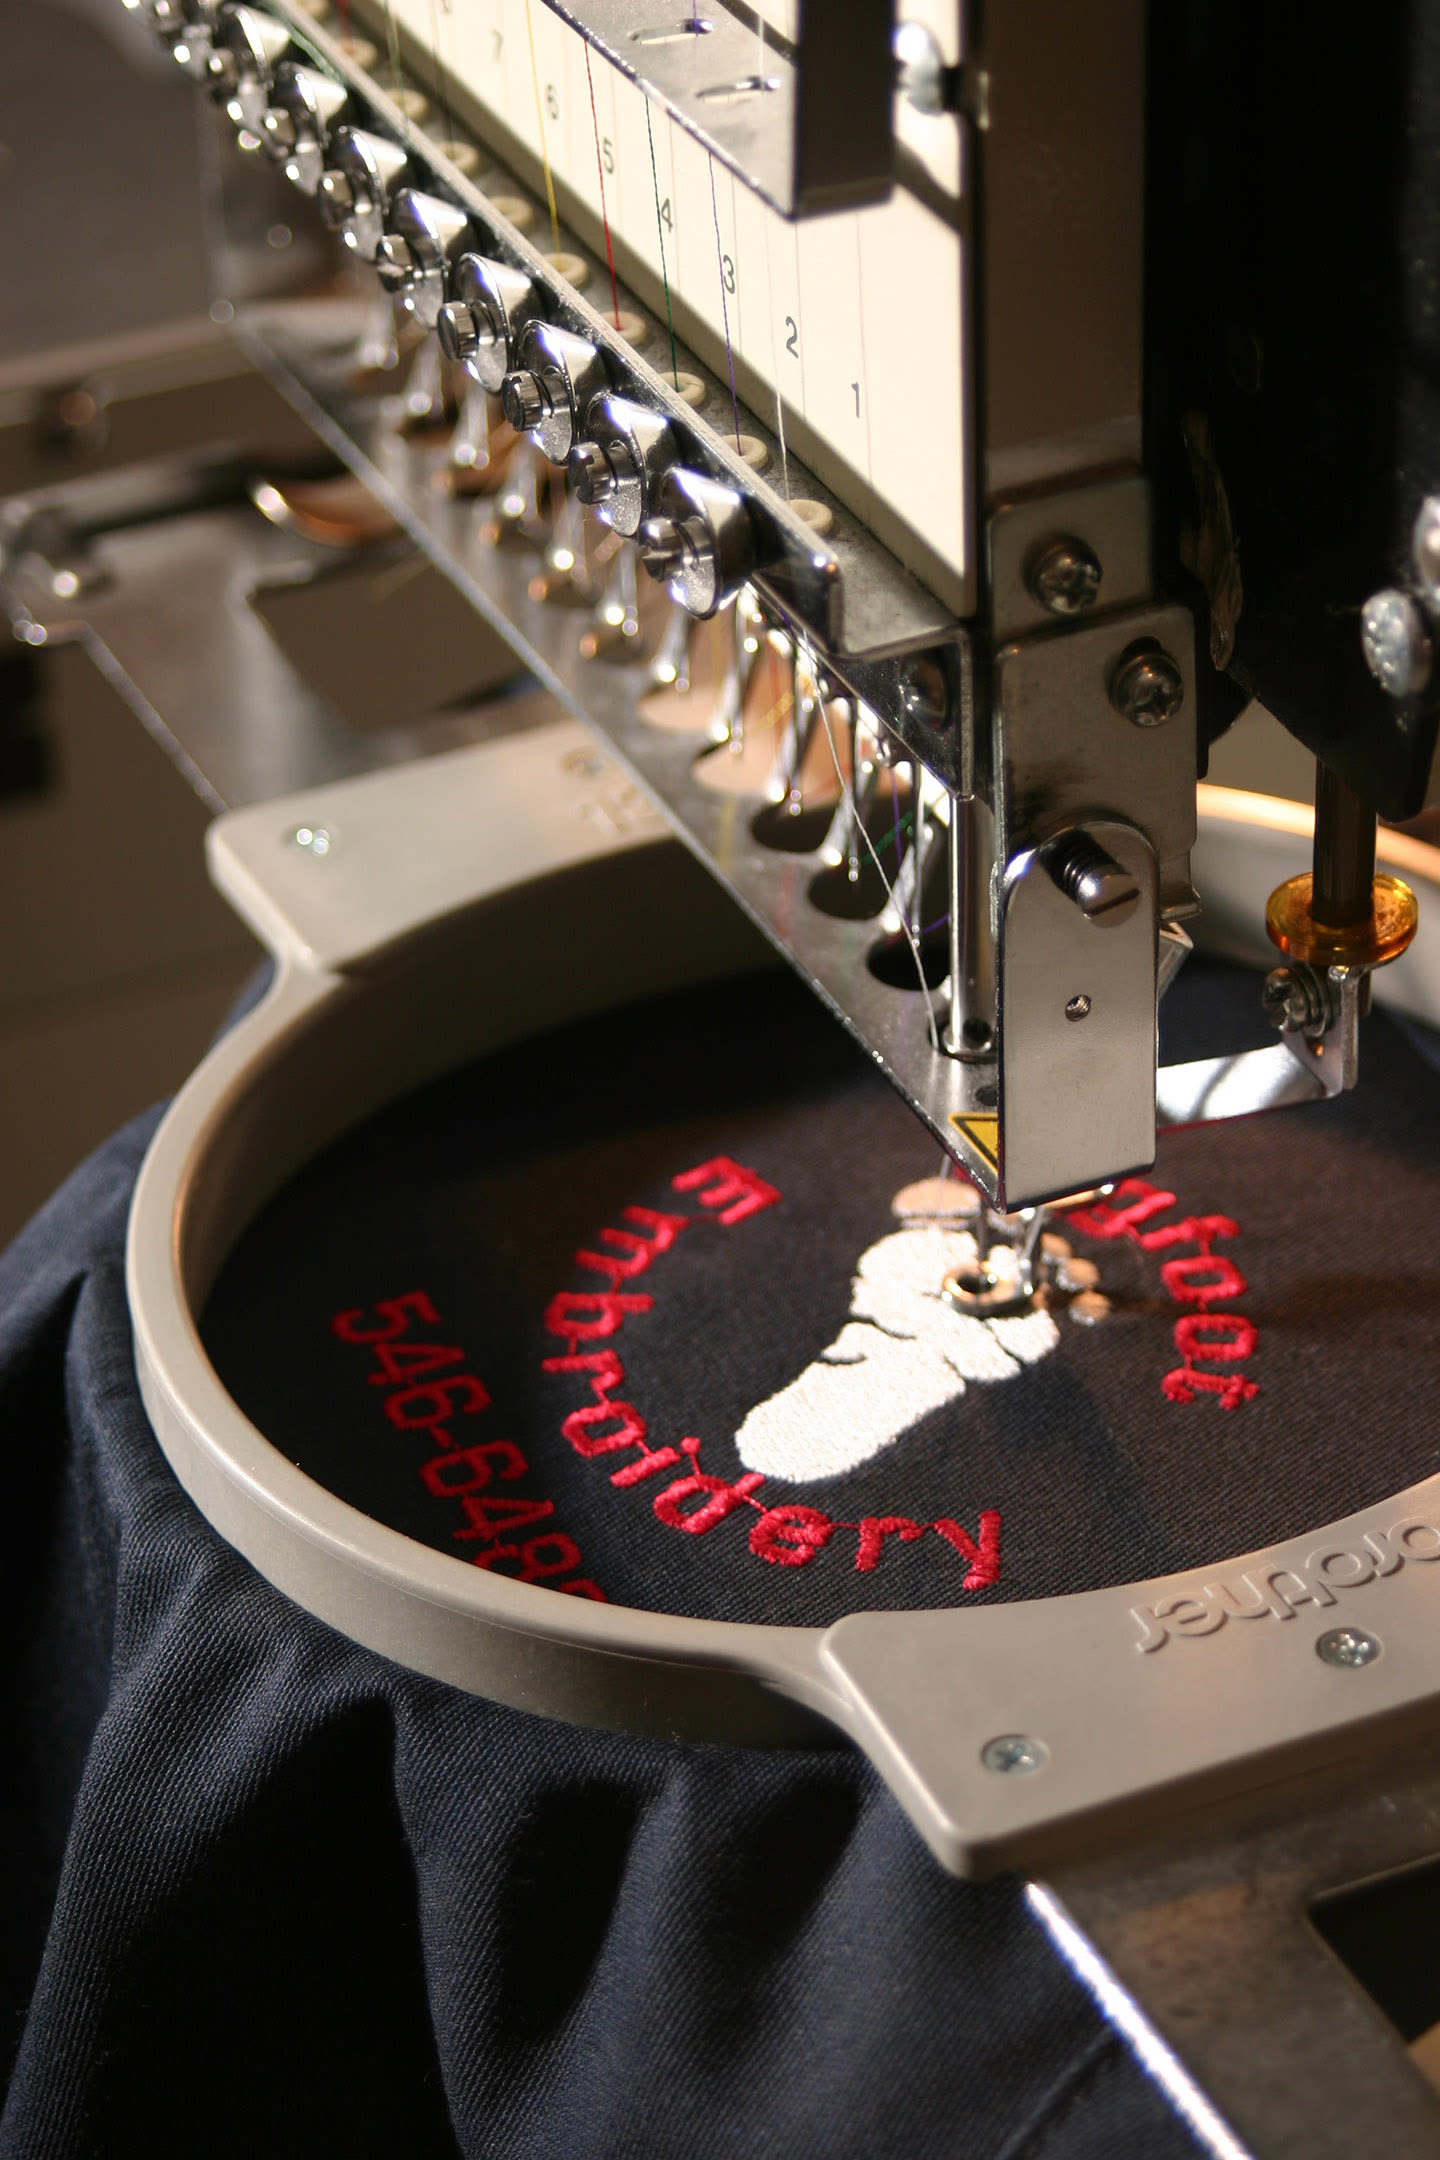 Uniform being embroidered.